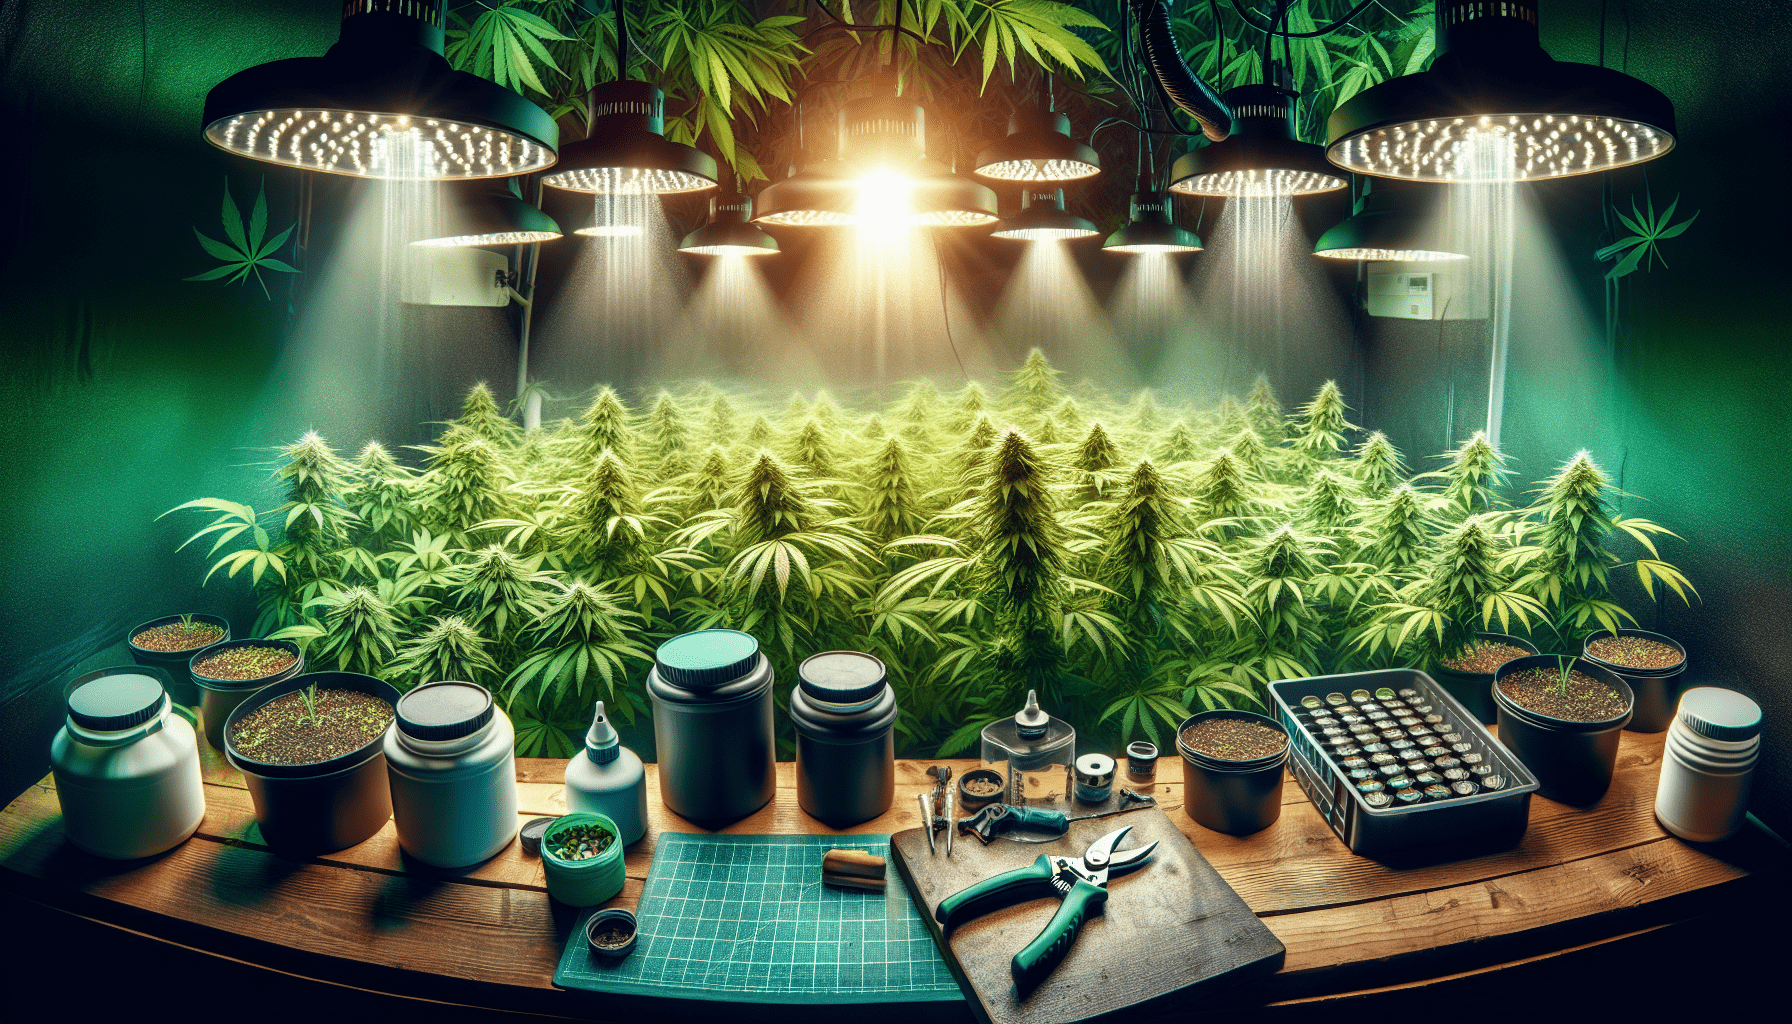 The Ideal Conditions for Growing Massive Cannabis Plants